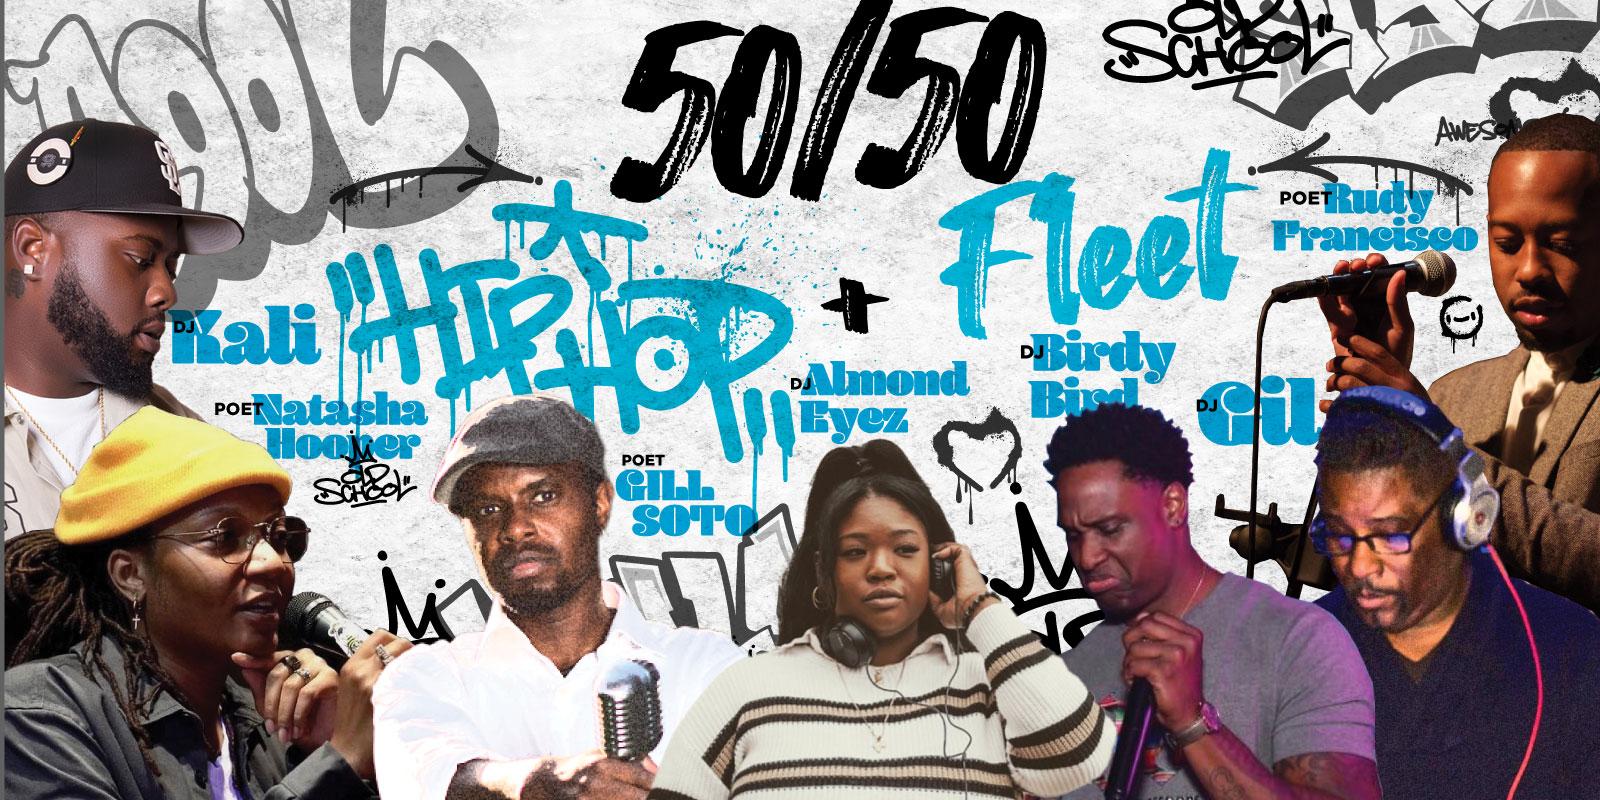 50 years of Hip Hop and Fleet 50 years anniversary. A collage of images of DJs and Poets with graffiti background. 